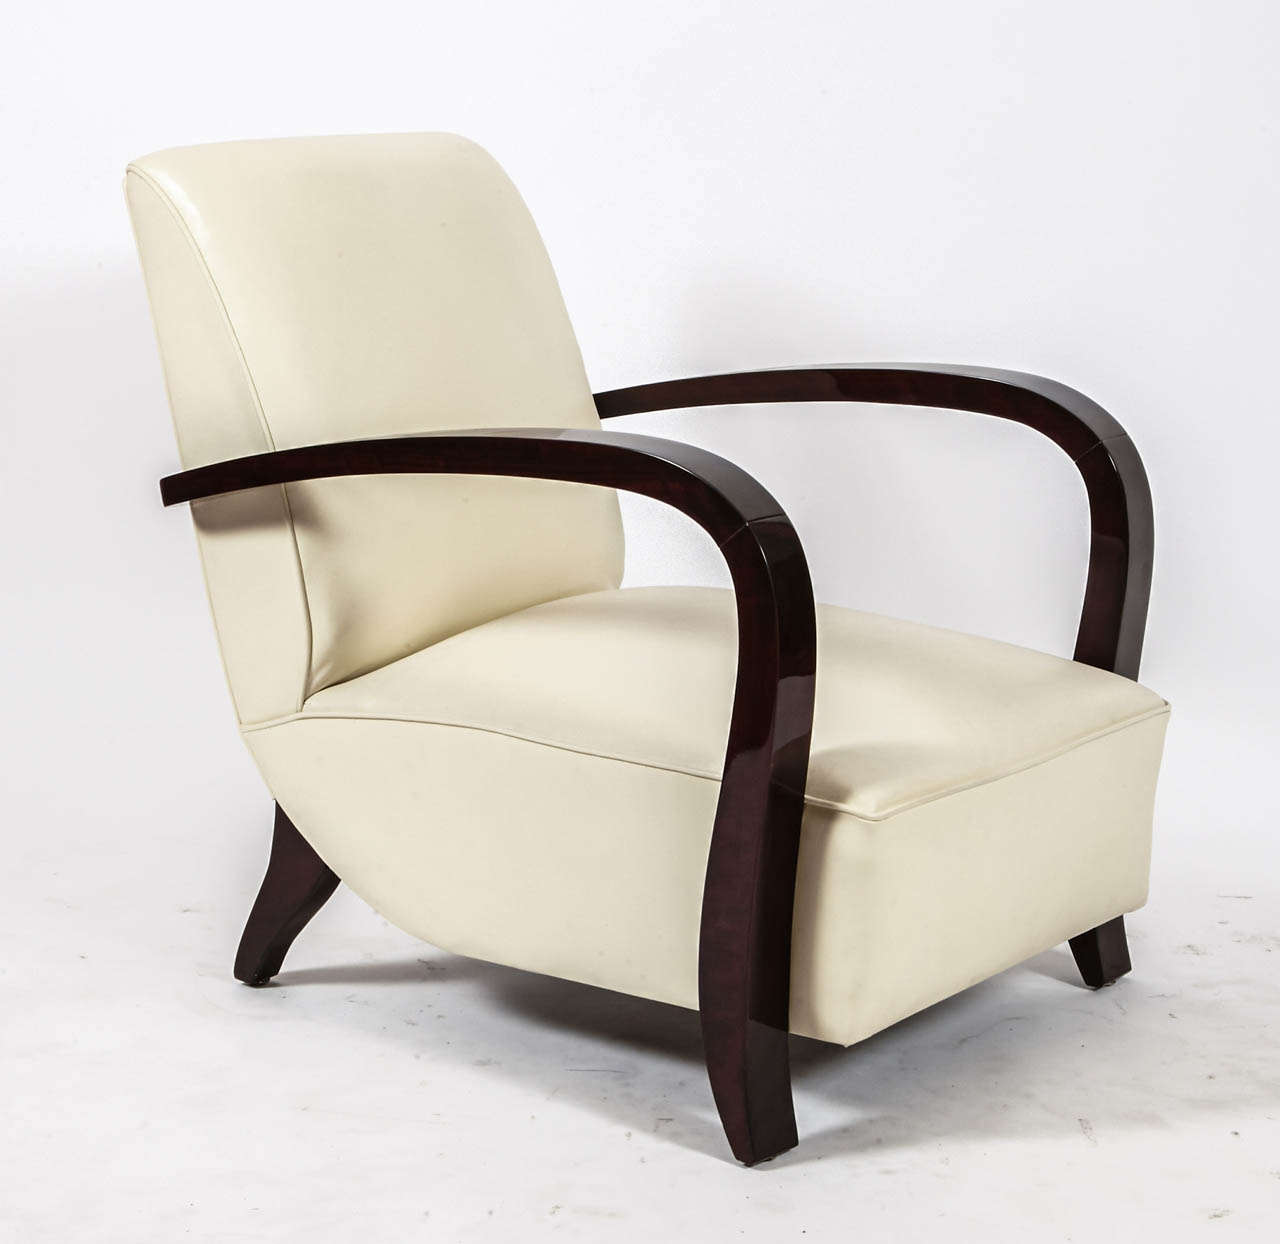 Set of four Art Deco armchairs very comfortable. You can add two repose pieds
restored in beige leather.